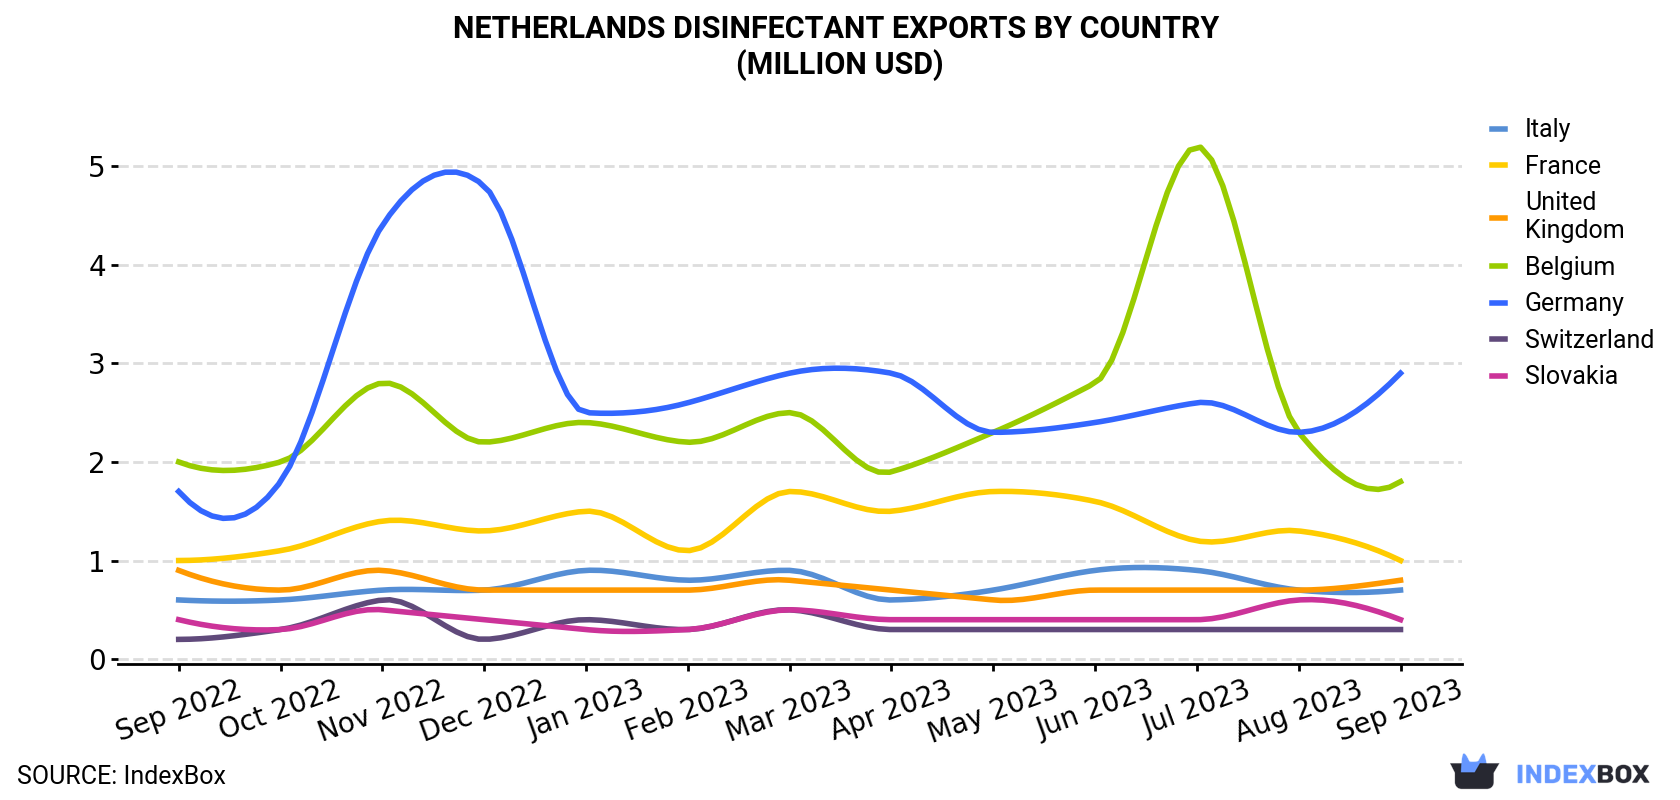 Netherlands Disinfectant Exports By Country (Million USD)